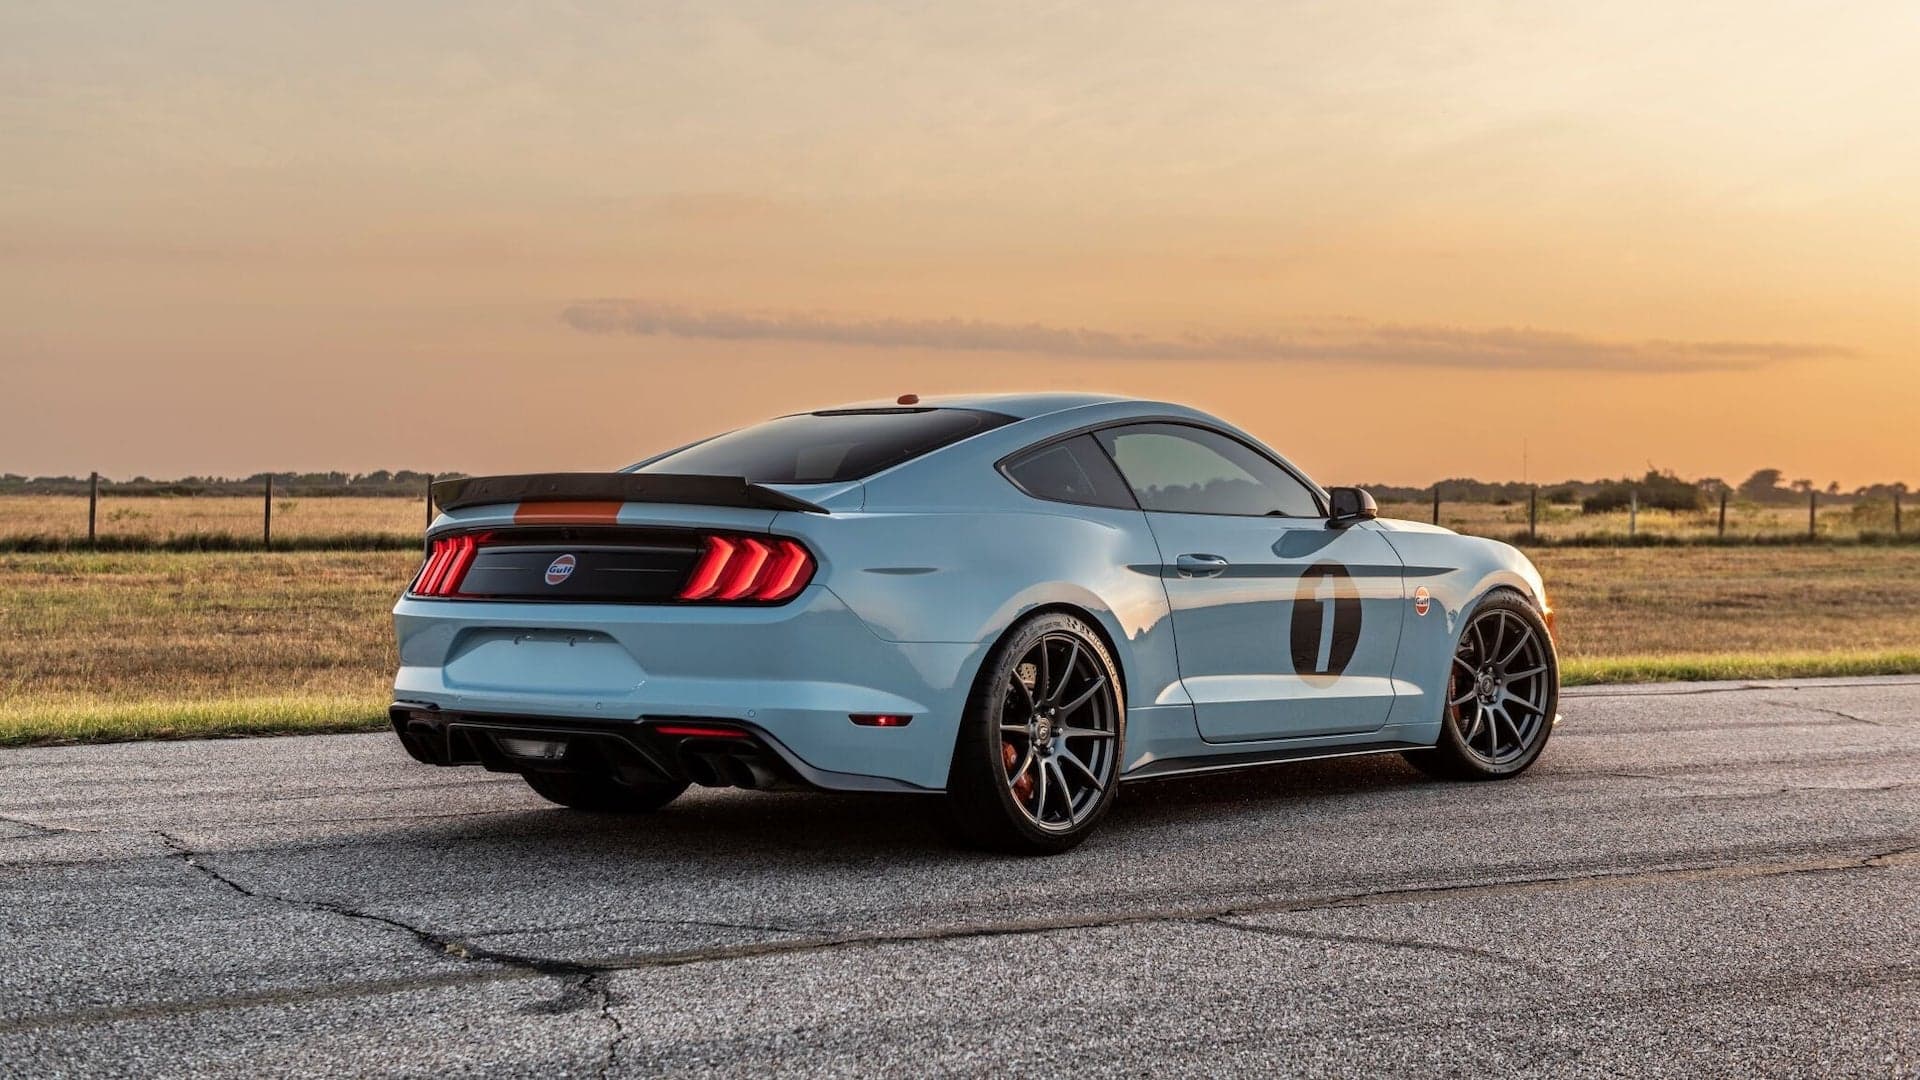 808-HP 2019 Ford Mustang GT ‘Gulf Heritage’ Is the Most Expensive New ‘Stang You Can Buy